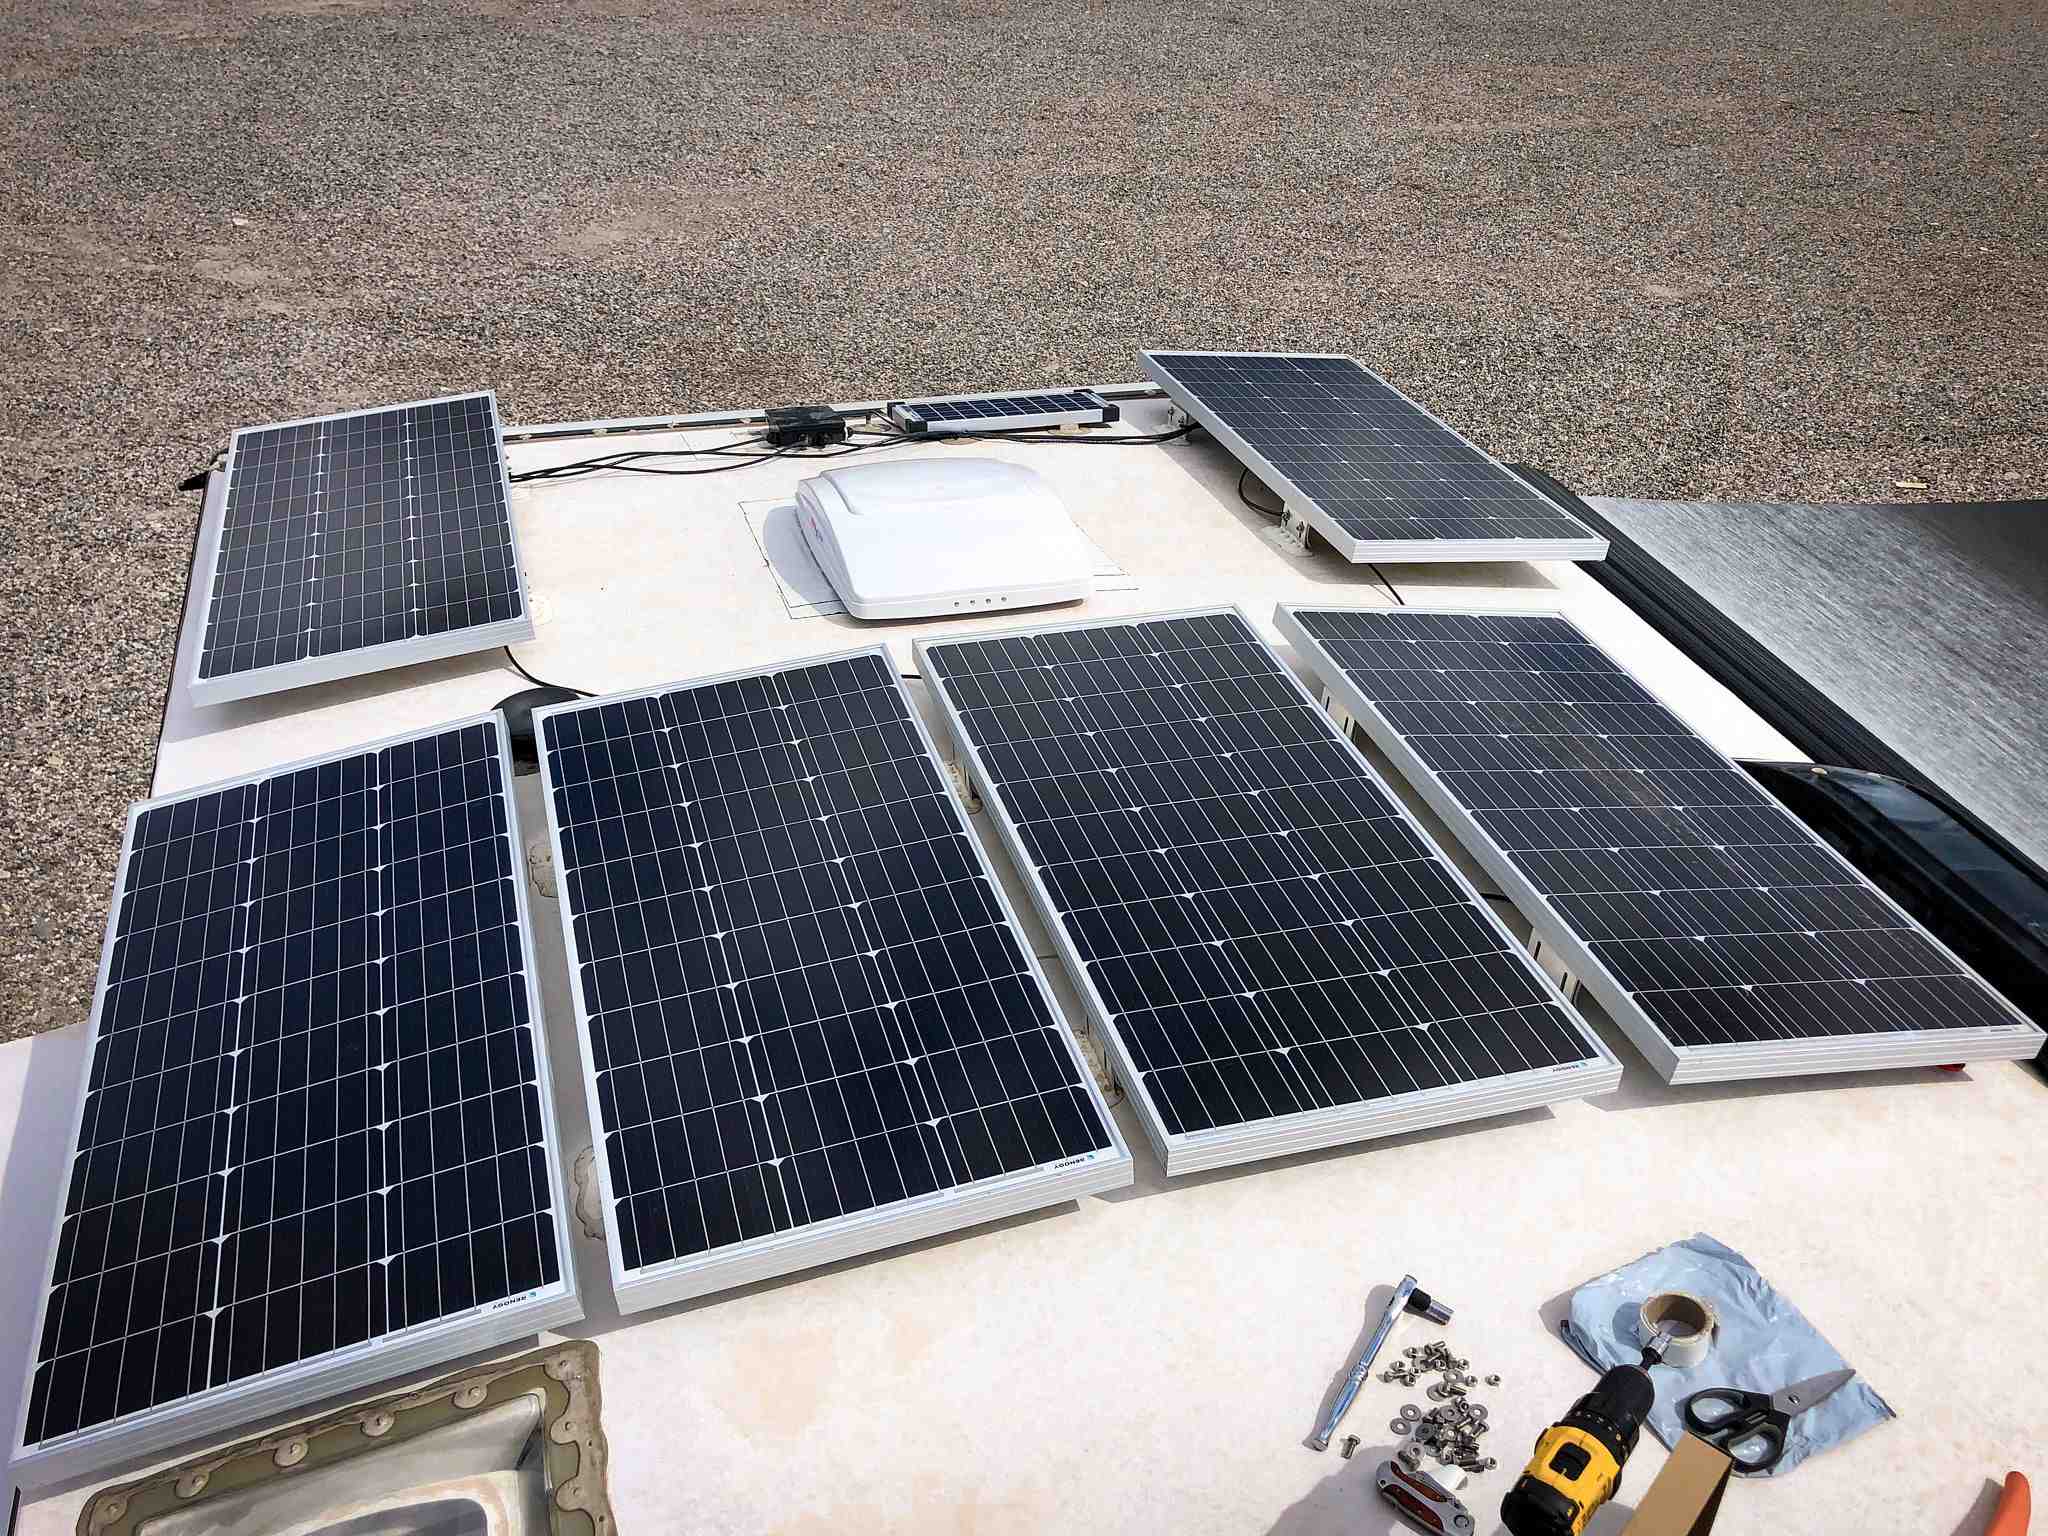 Are solar panels for an RV worth it?